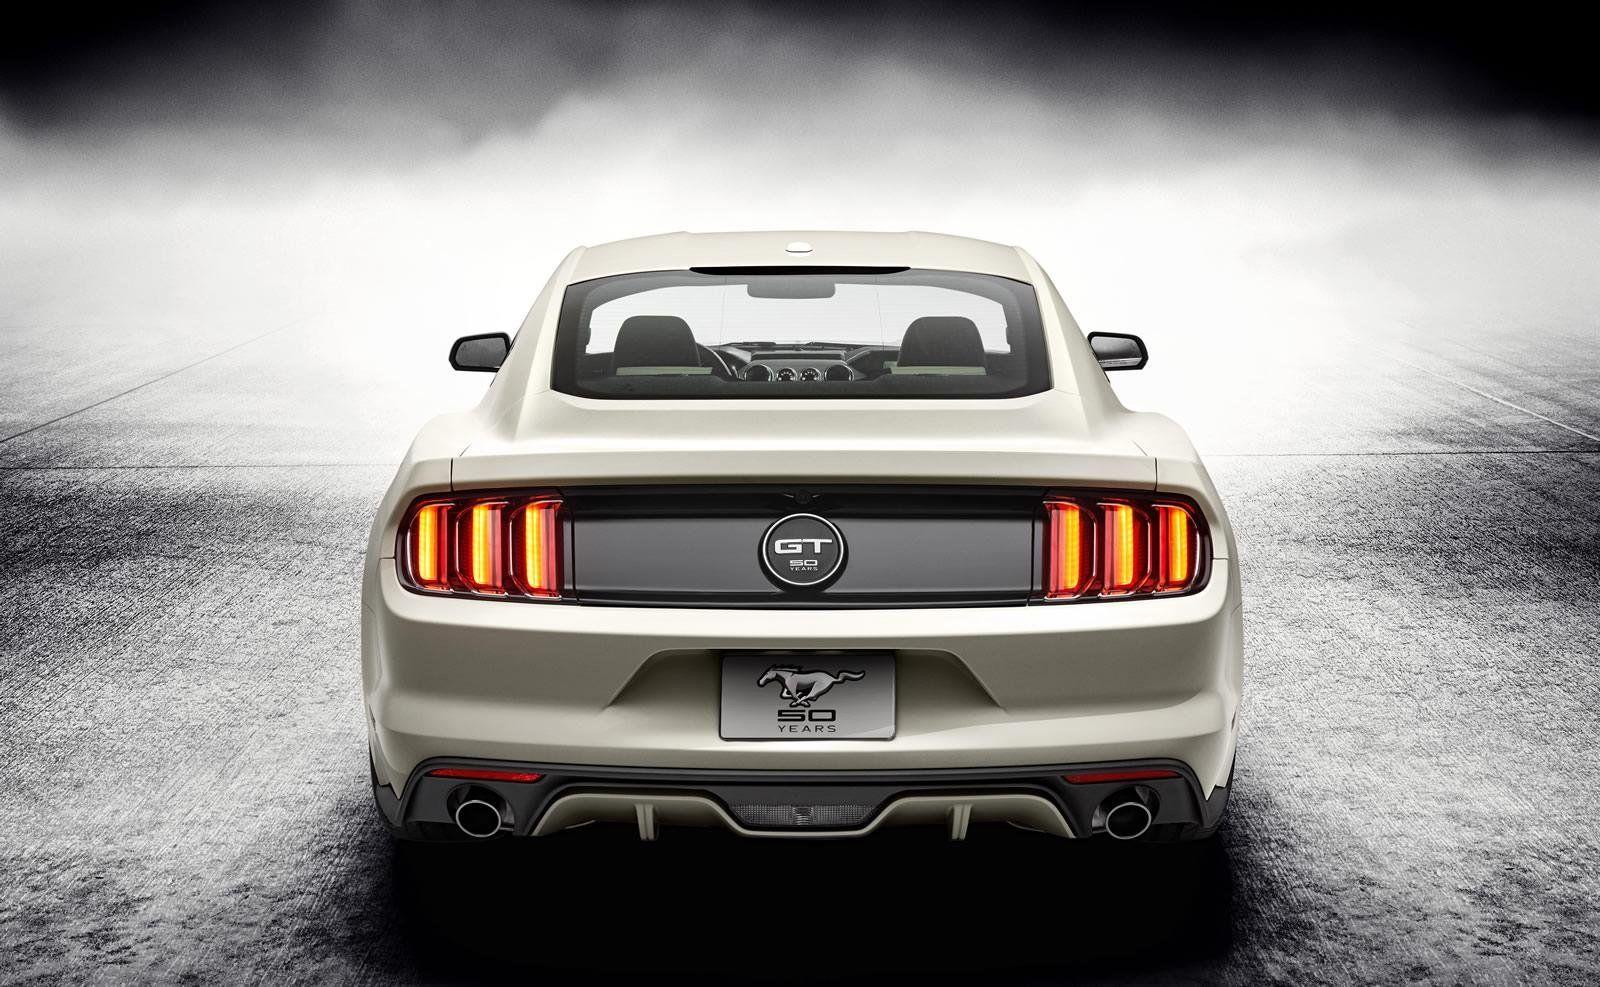 Ford Mustang 50th Anniversary Logo - 50th Anniversary Special Edition Ford Mustang is here - StangNet